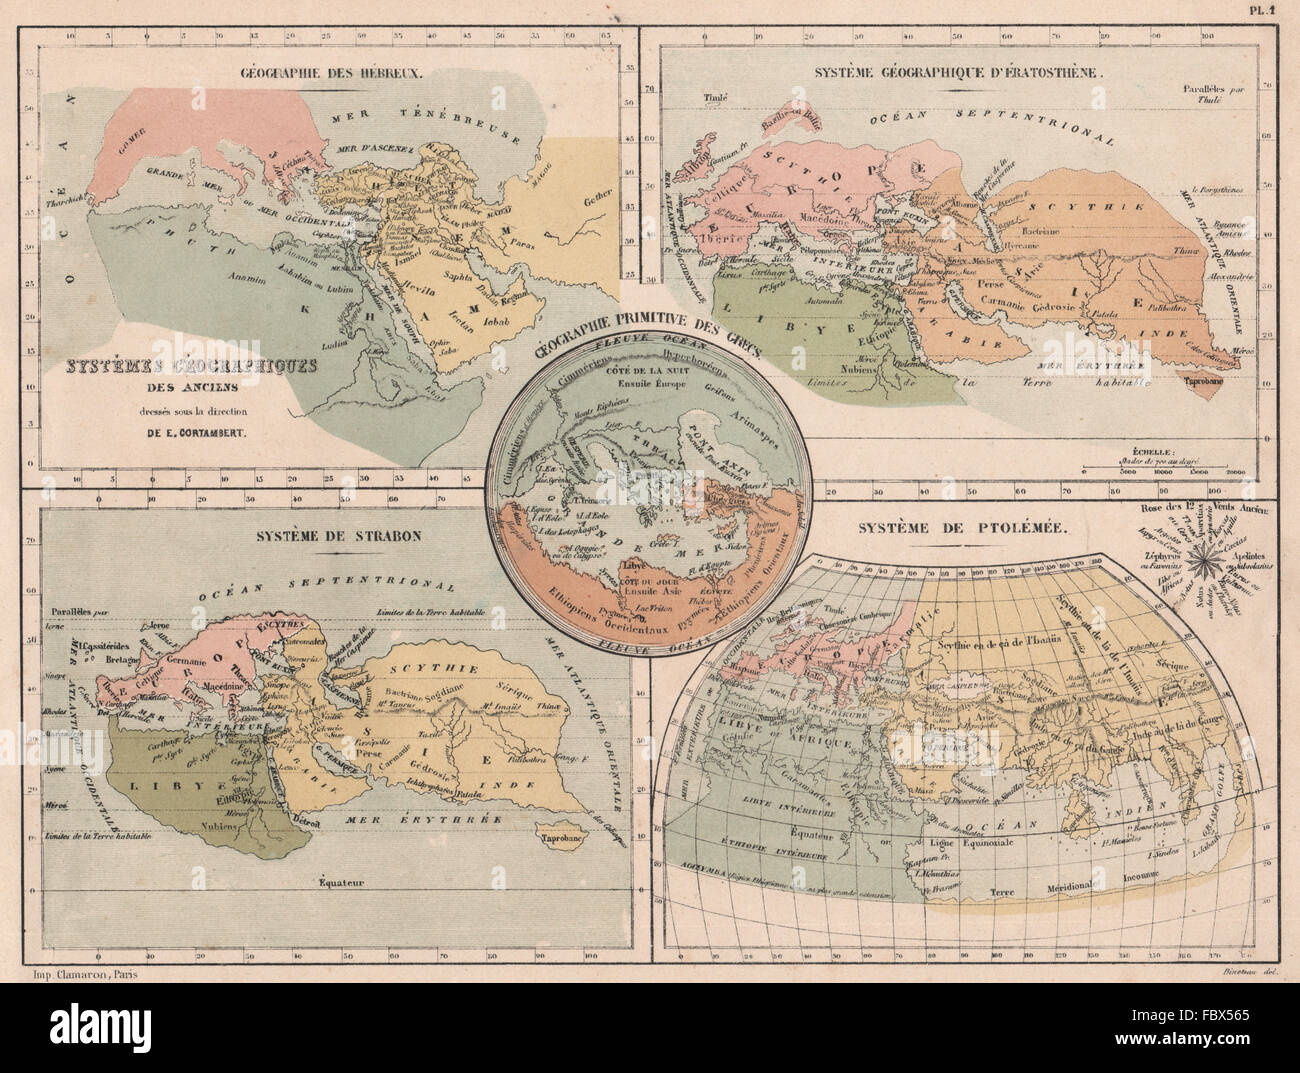 ANCIENT WORLD. Jews Strabo Eratosthenes Ptolemy Ancient Greeks, 1880 old map Stock Photo